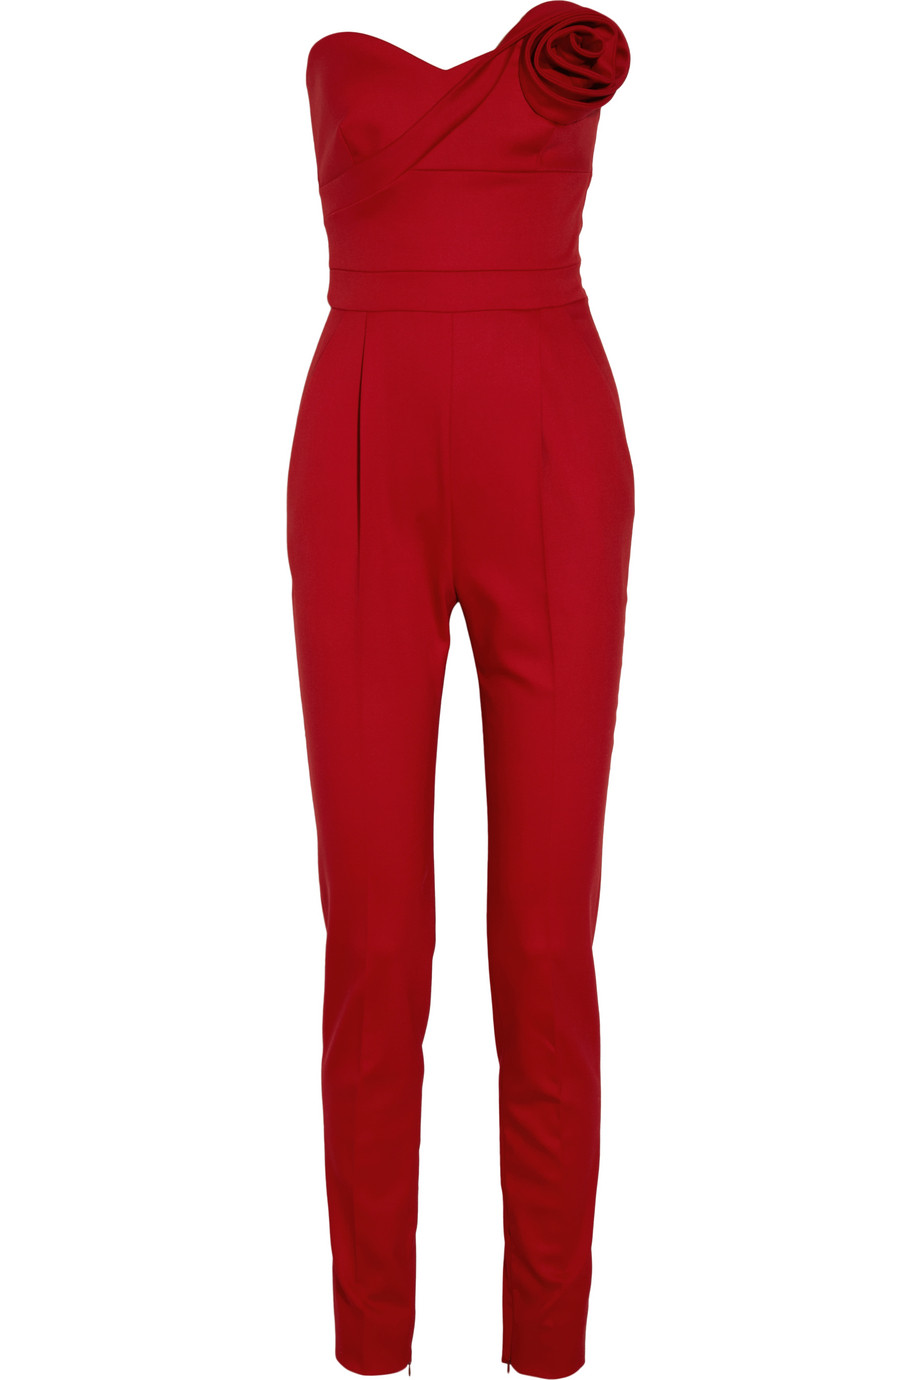 Valentino Strapless Woolblend Twill Jumpsuit in Red | Lyst